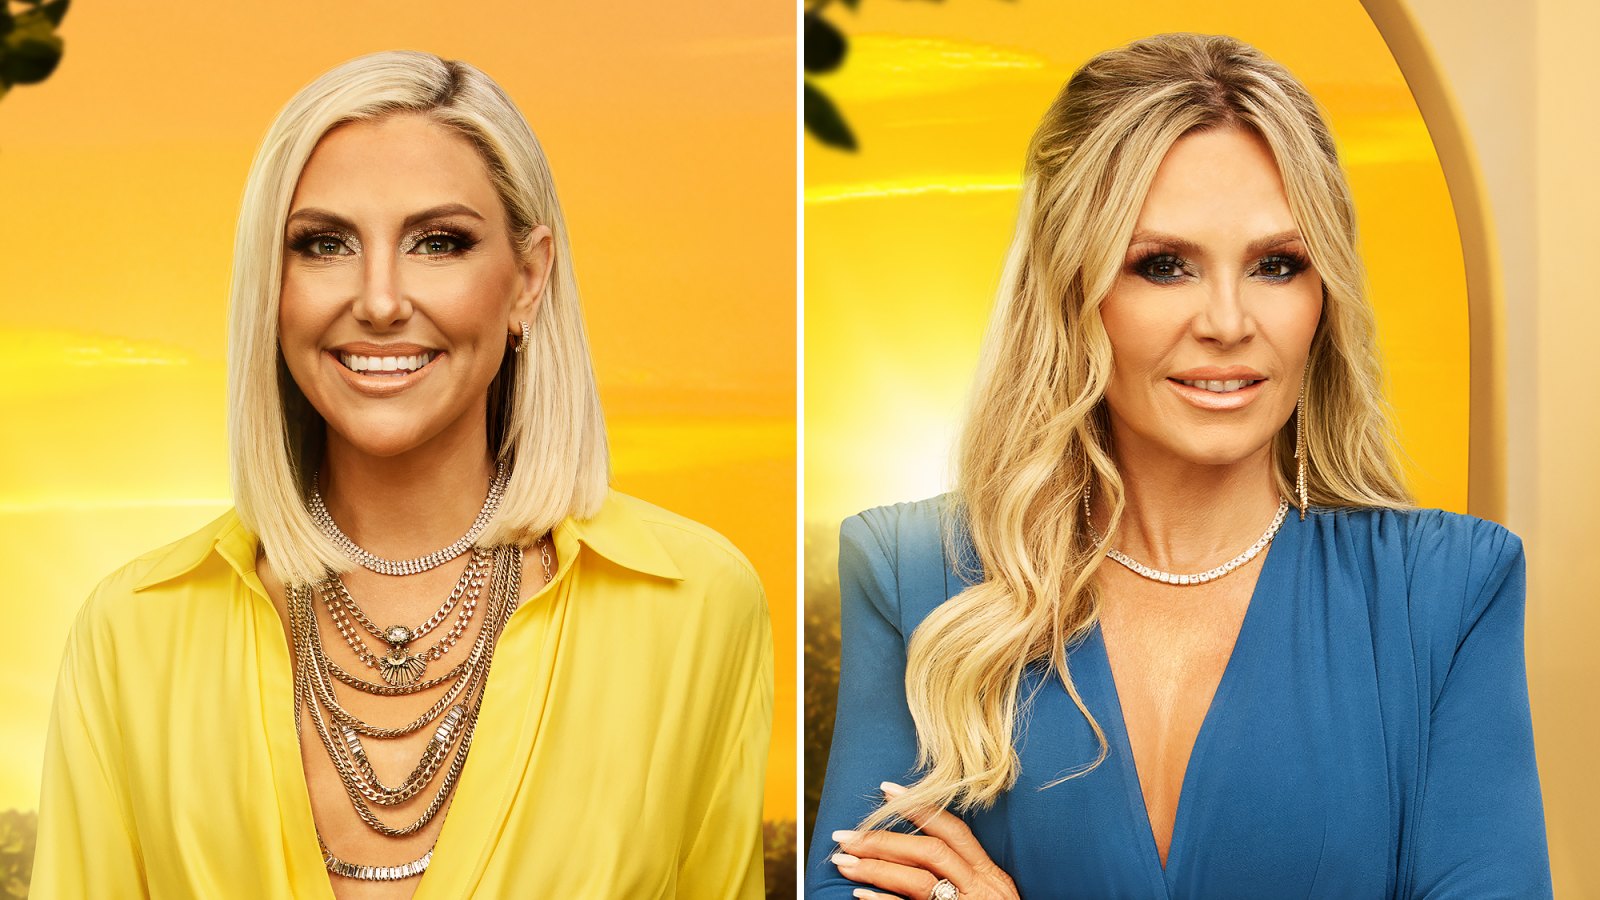 Gina Kirschenheiter Clashes With Tamra Judge in 'Real Housewives of Orange County' Sneak Peek: 'I'm Pissed'